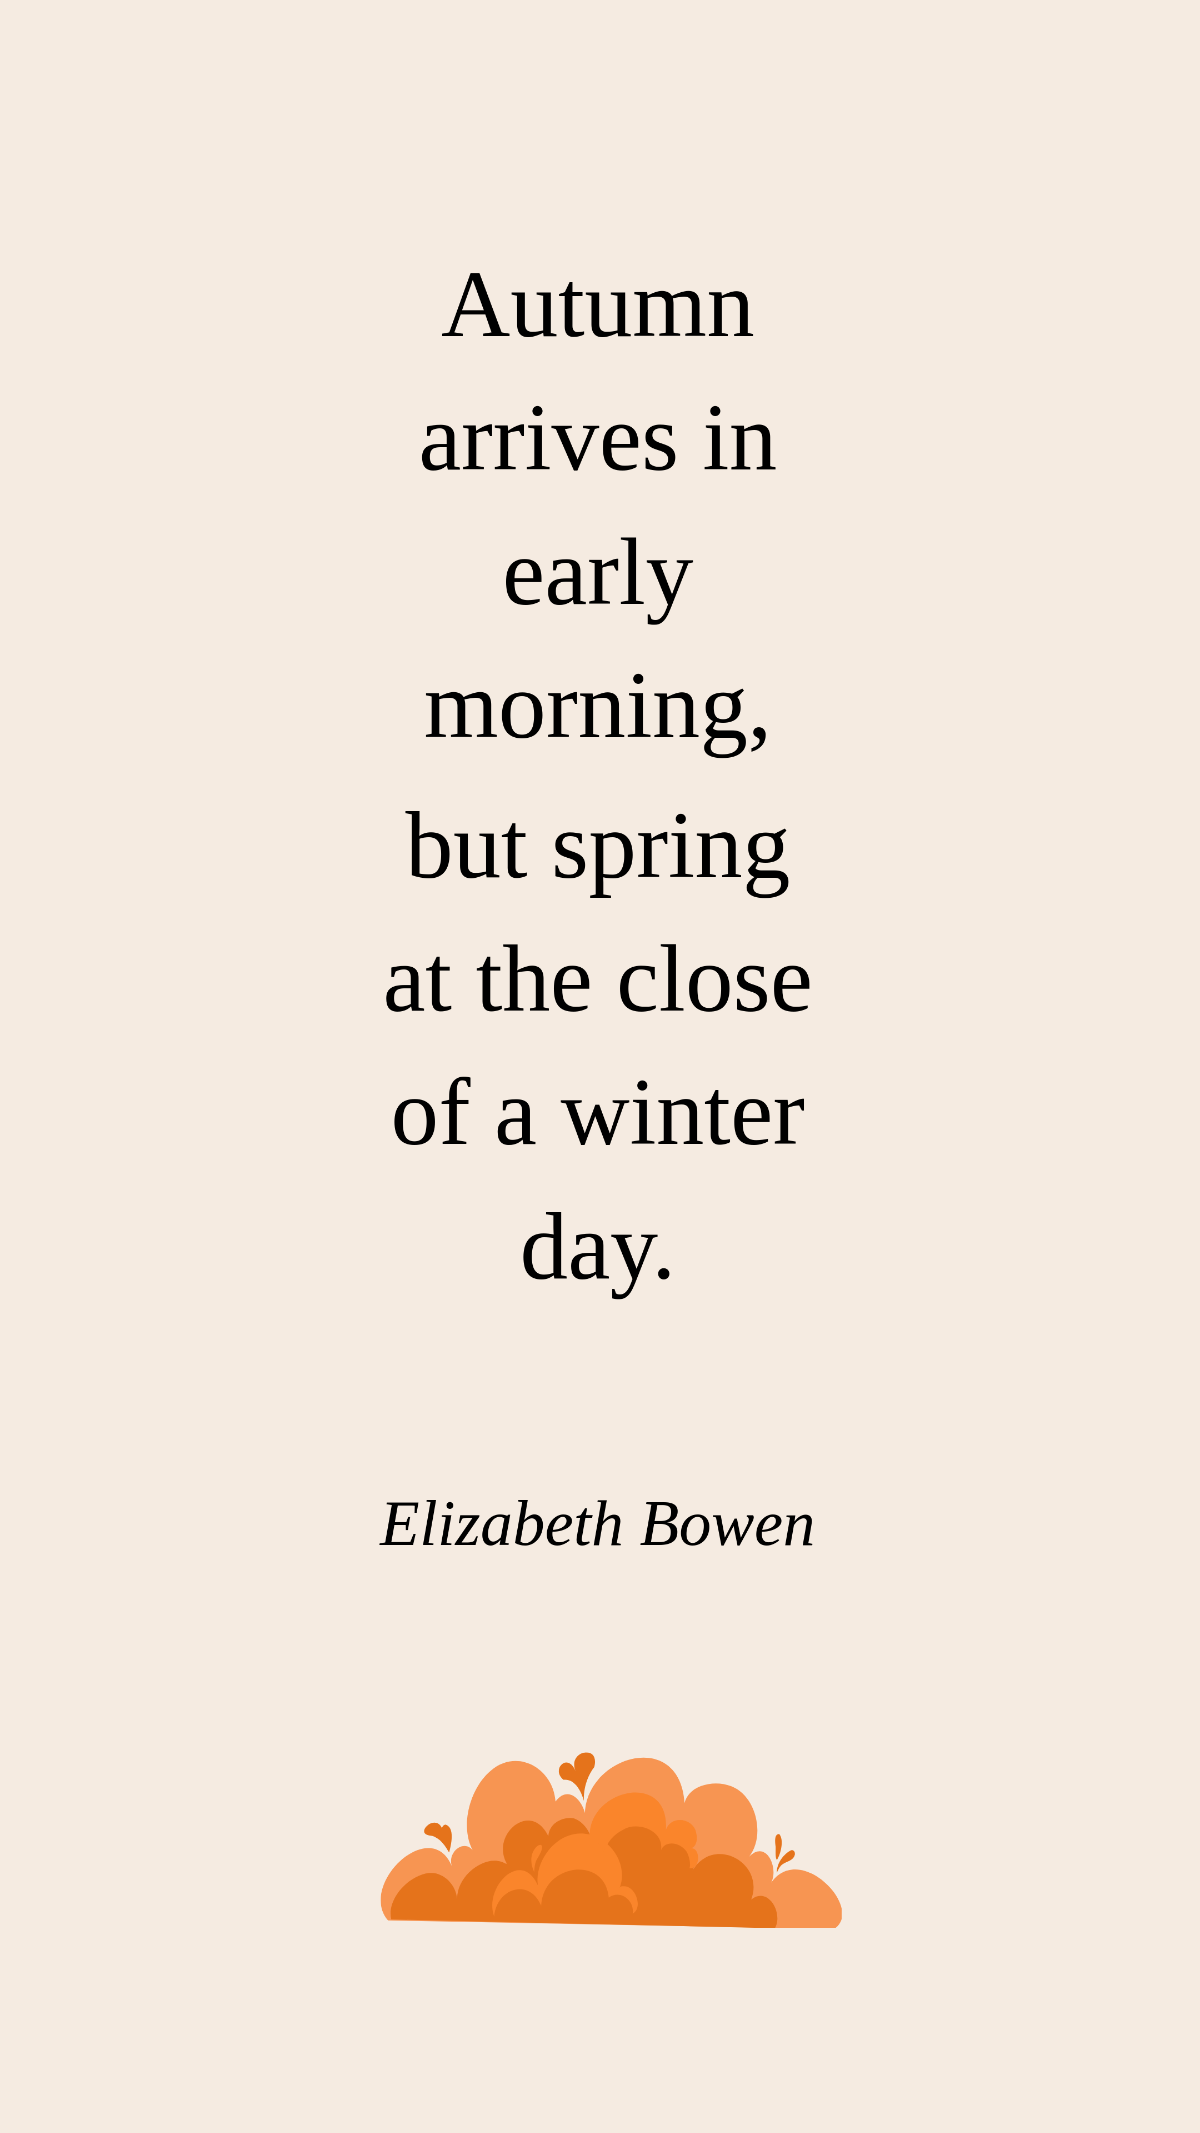 Elizabeth Bowen - Autumn arrives in early morning, but spring at the close of a winter day. Template